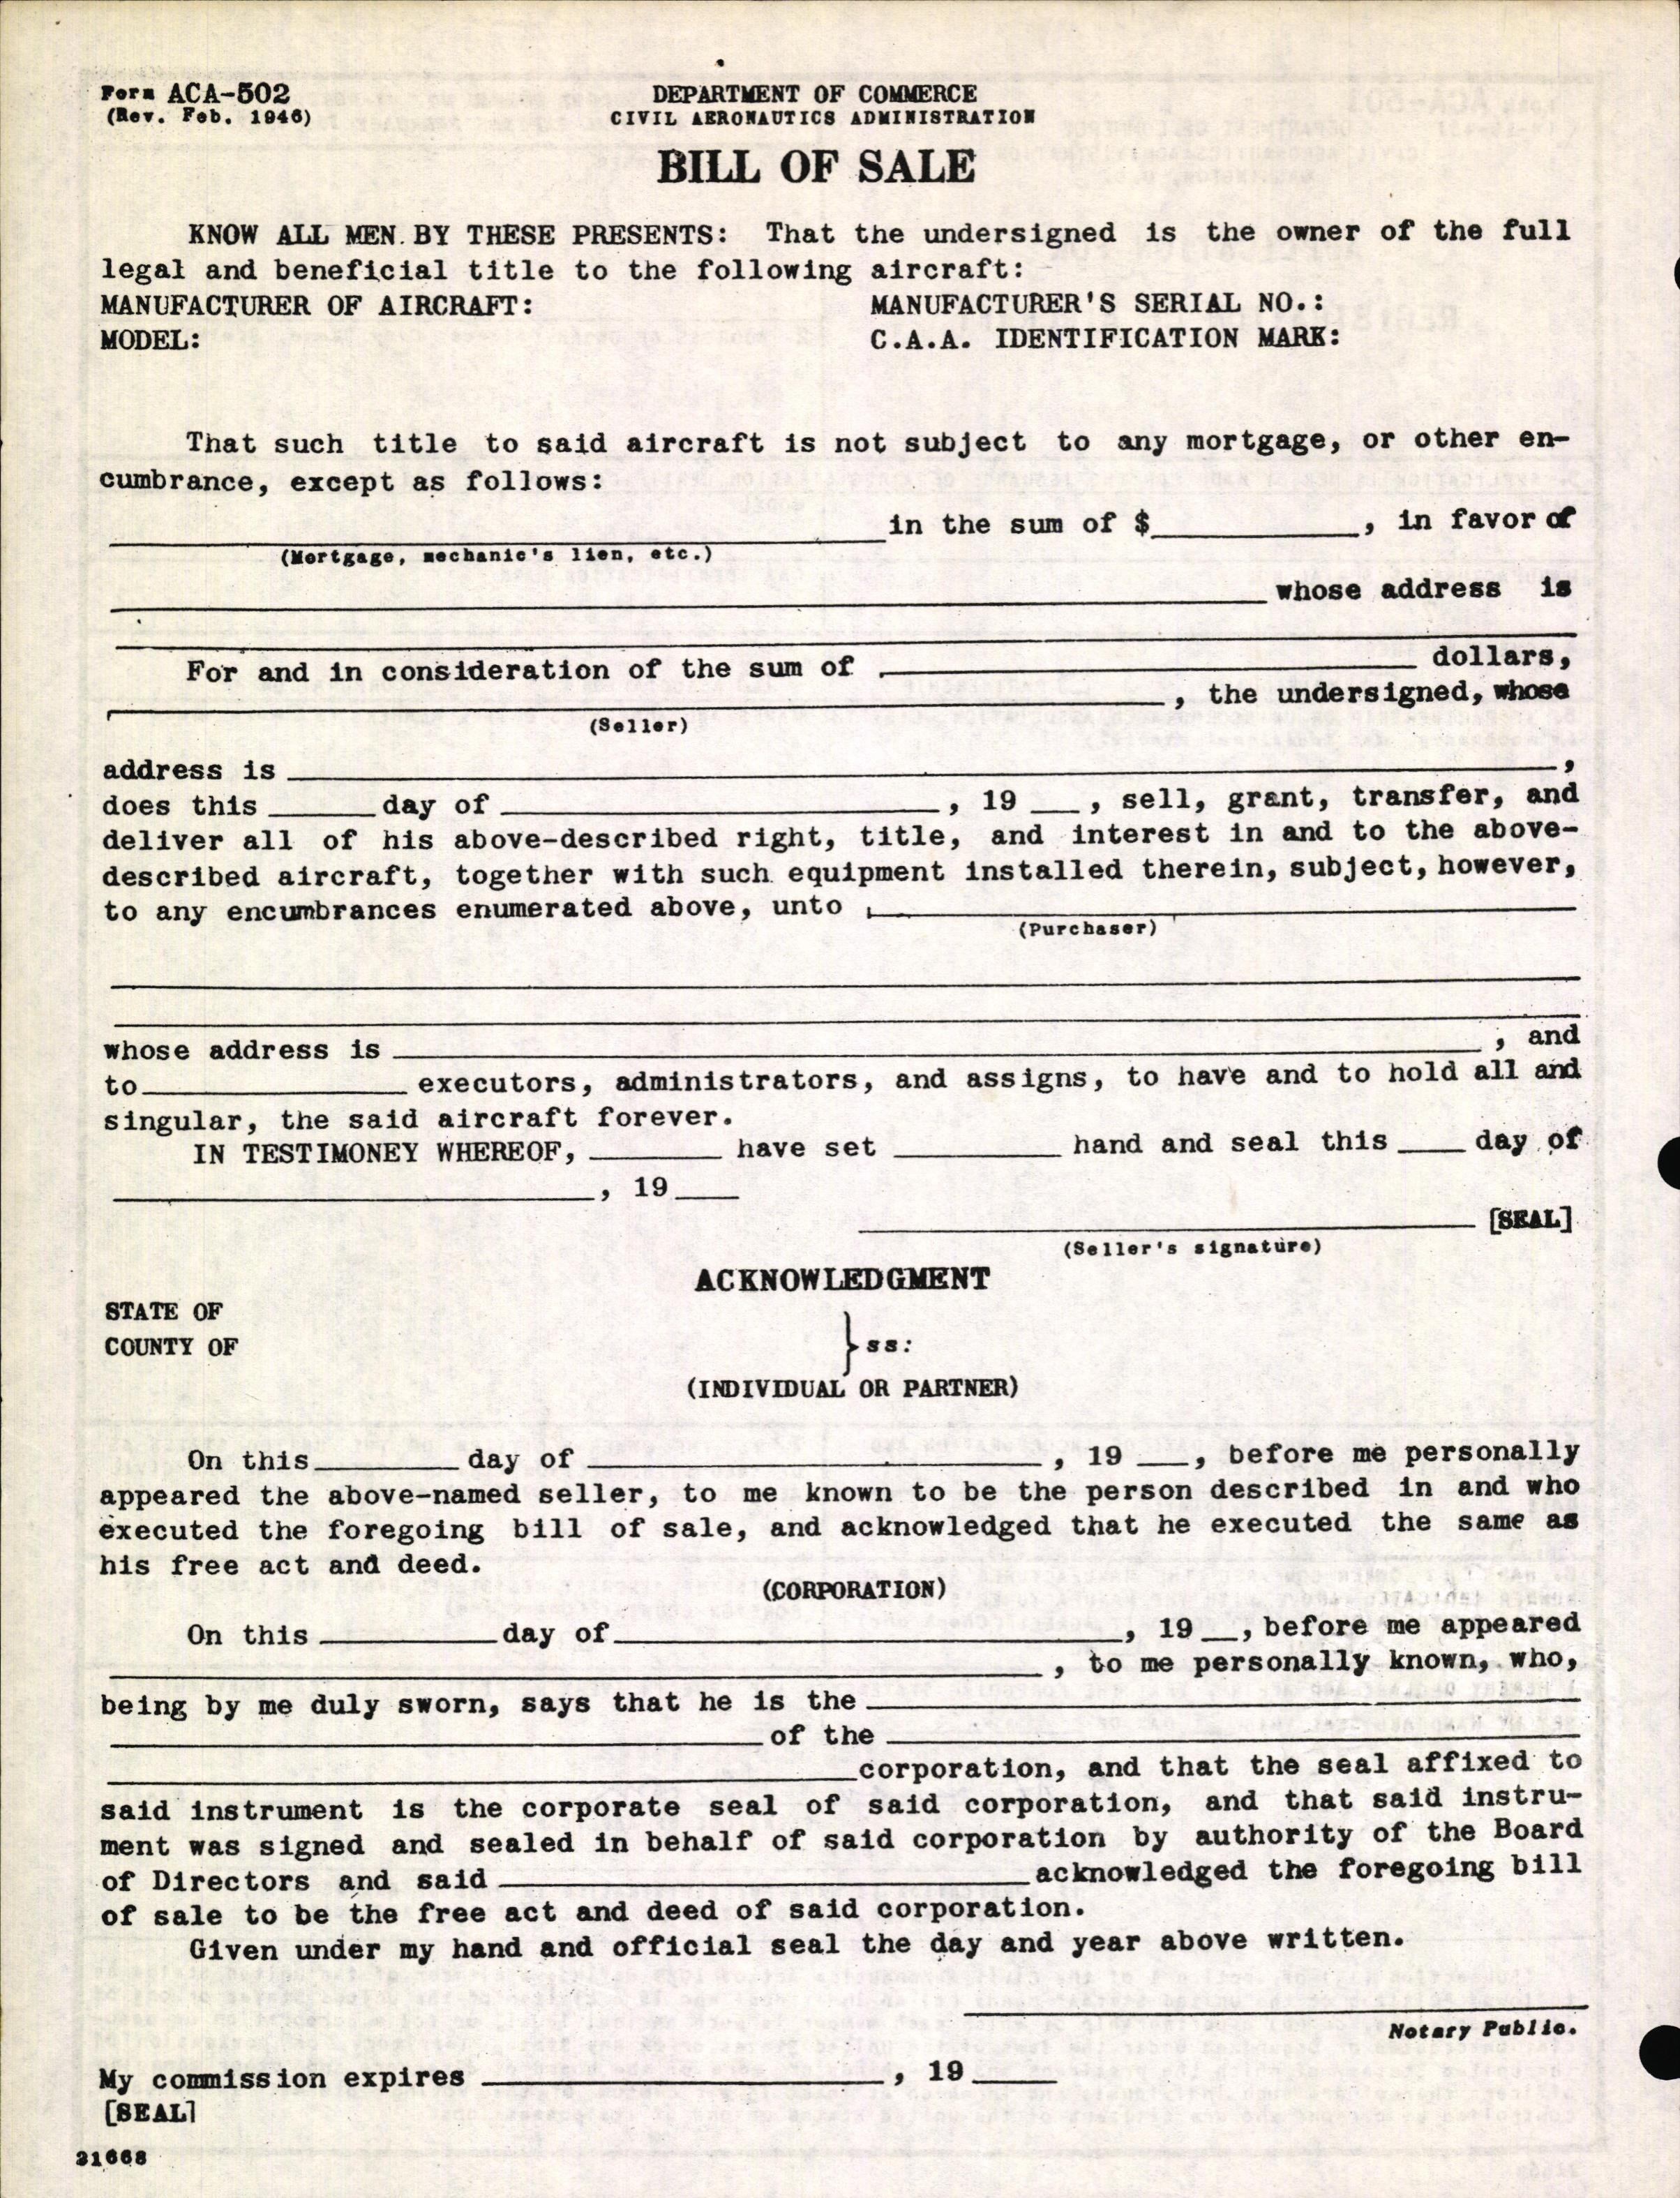 Sample page 4 from AirCorps Library document: Technical Information for Serial Number 2207